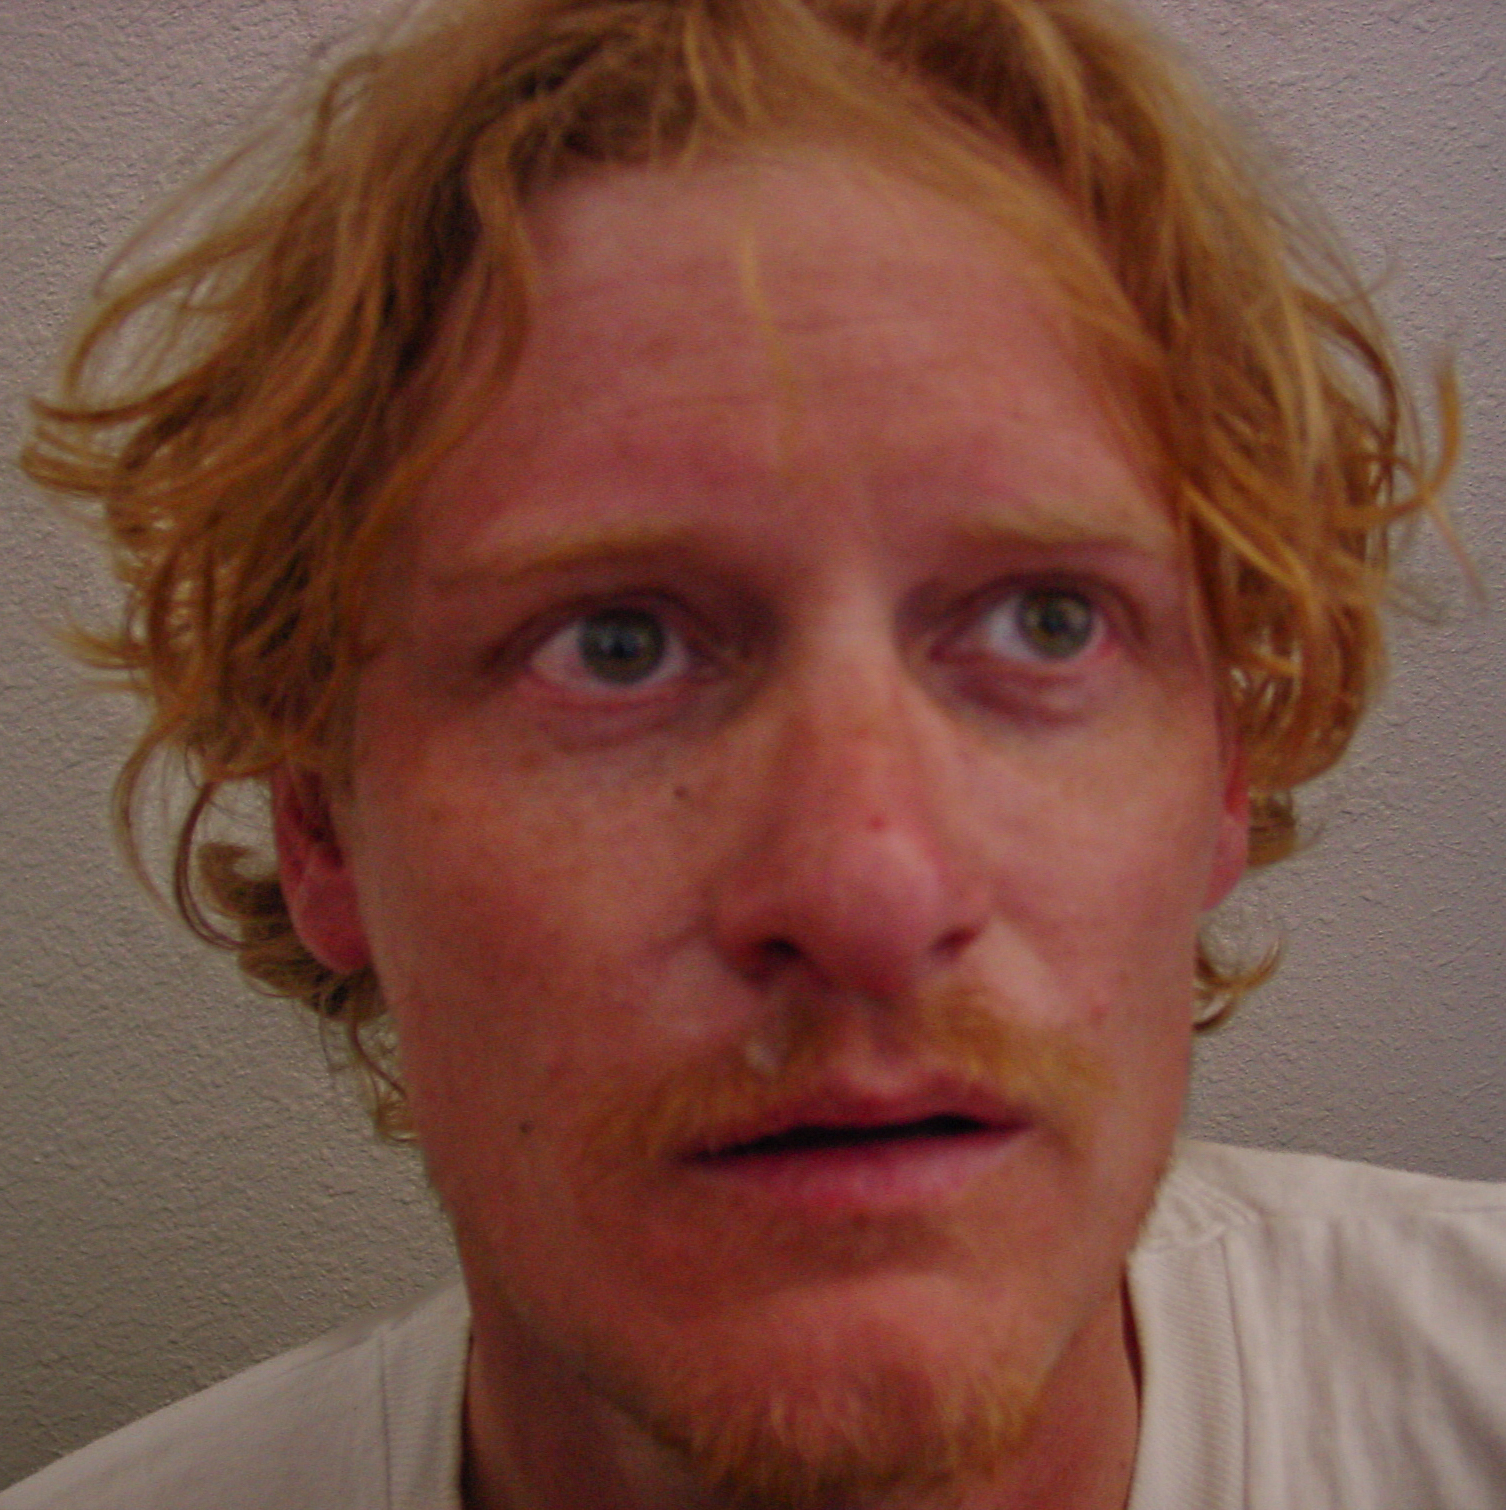 A photo of the author with disheveled hair and sunburned face. 